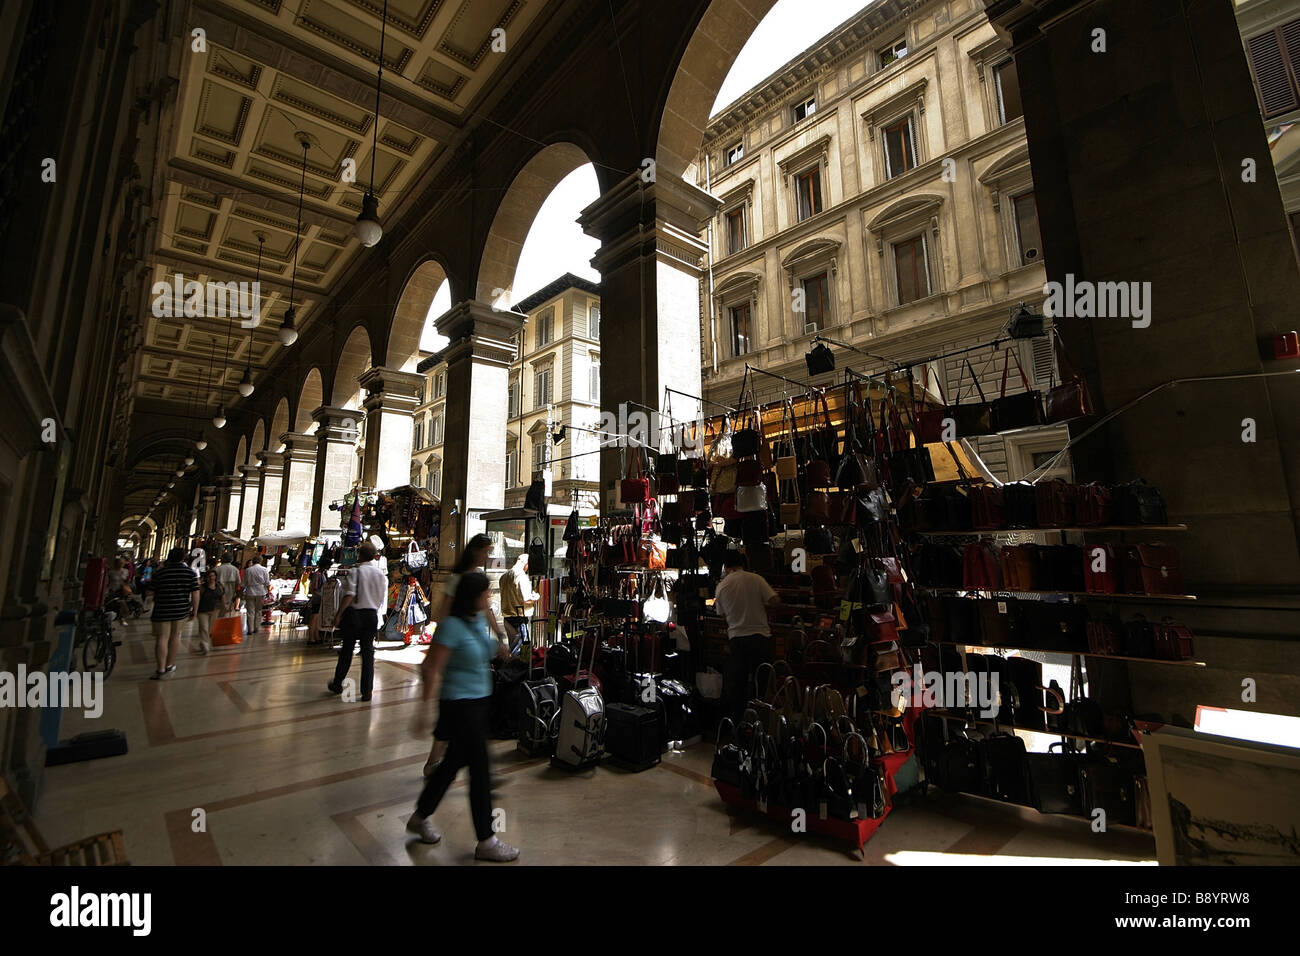 Old Shopping mall in Florence, Italy Stock Photo - Alamy